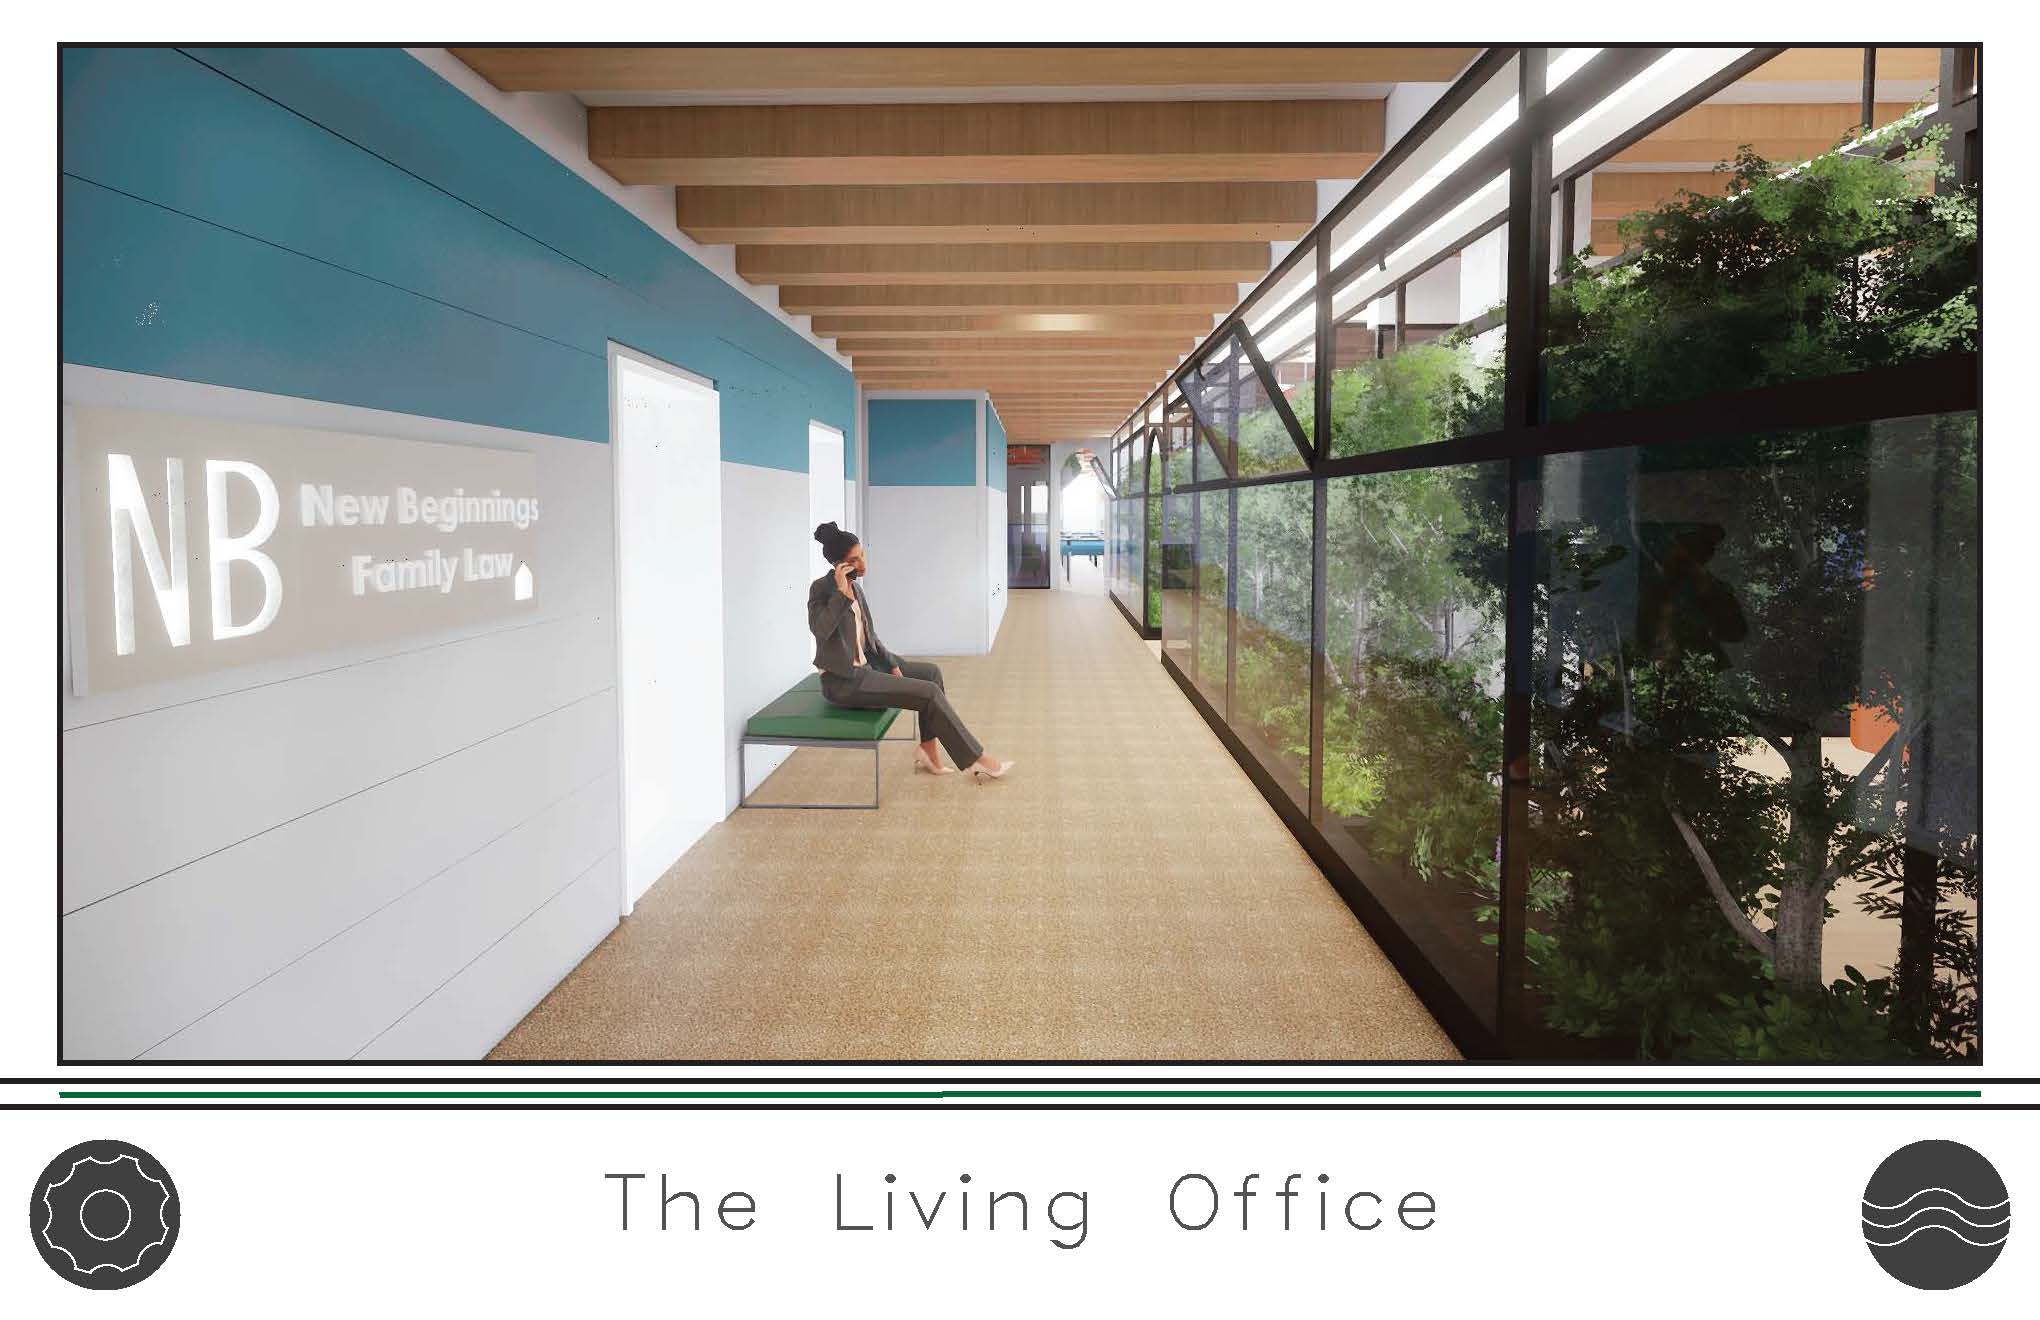 Sarah Whitehouse design submission - The Living Office